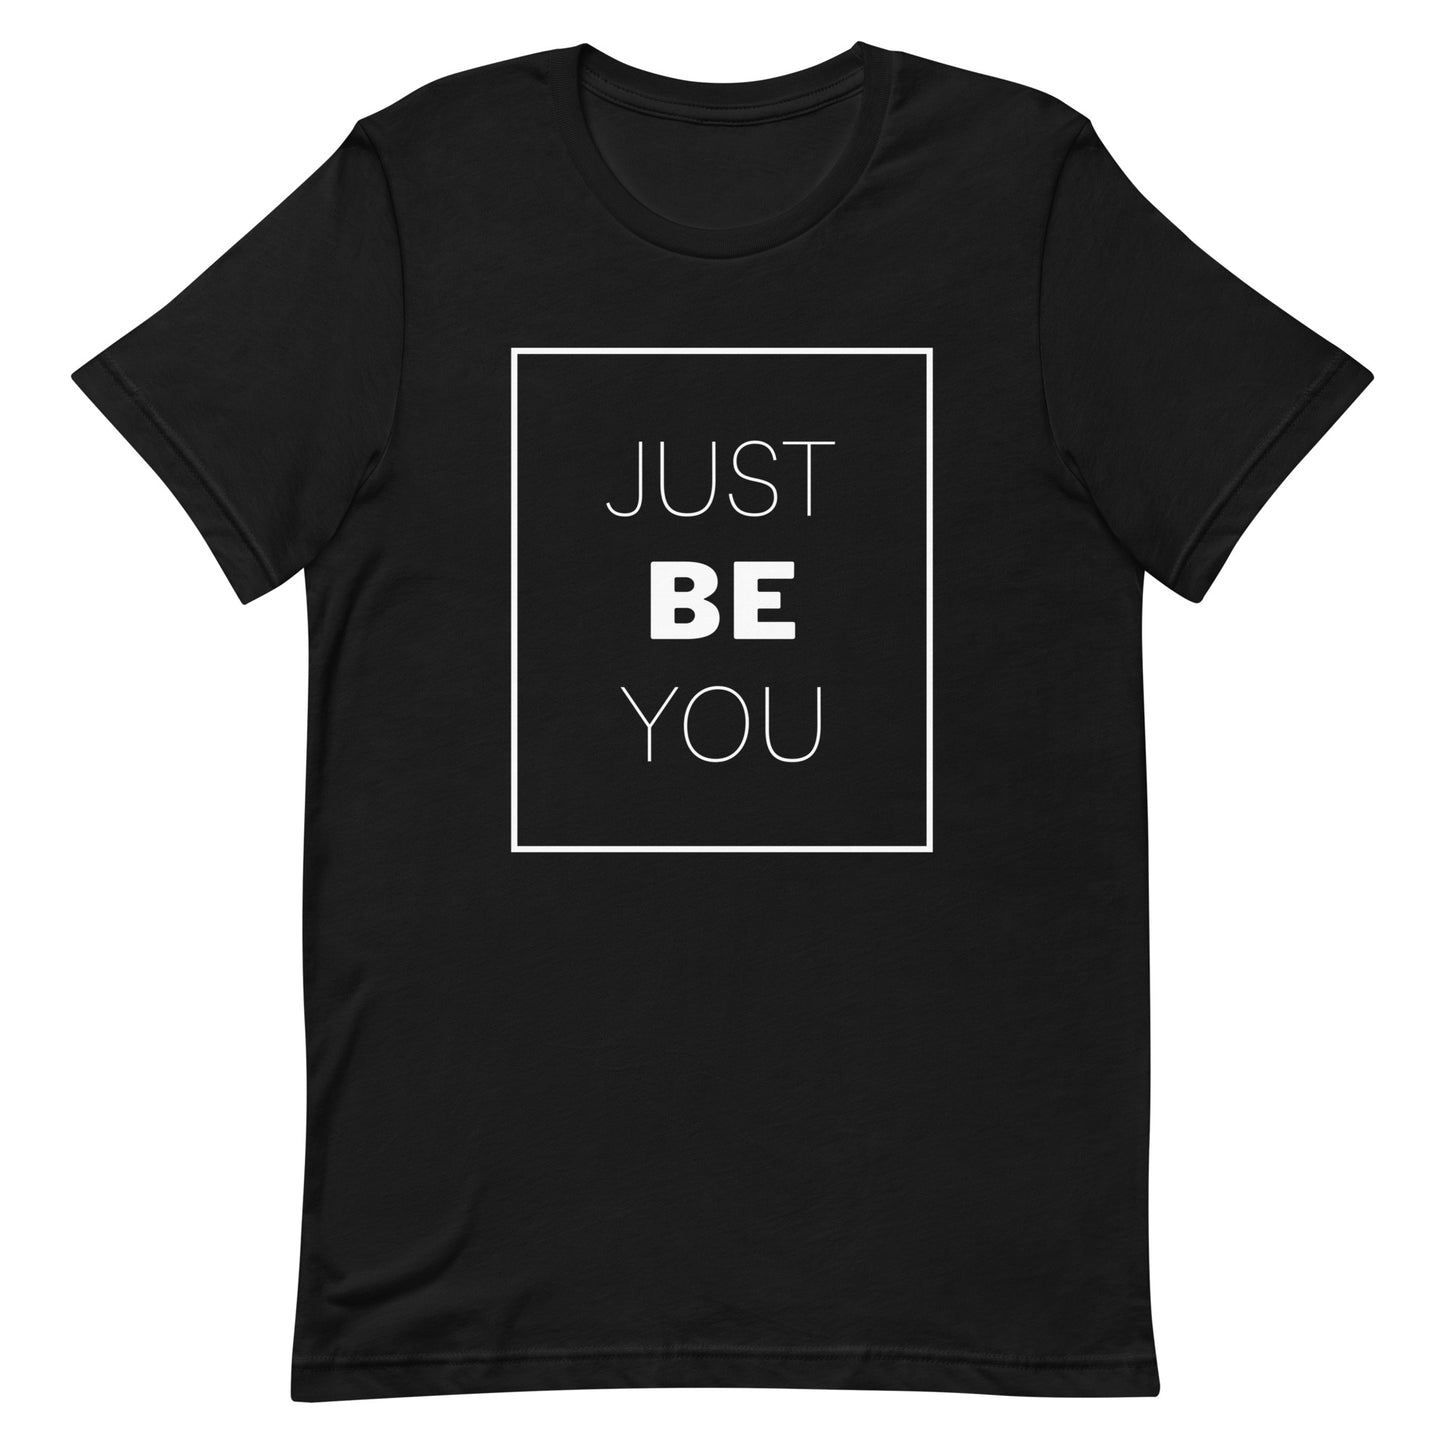 Unisex t-shirt "Just BE You"